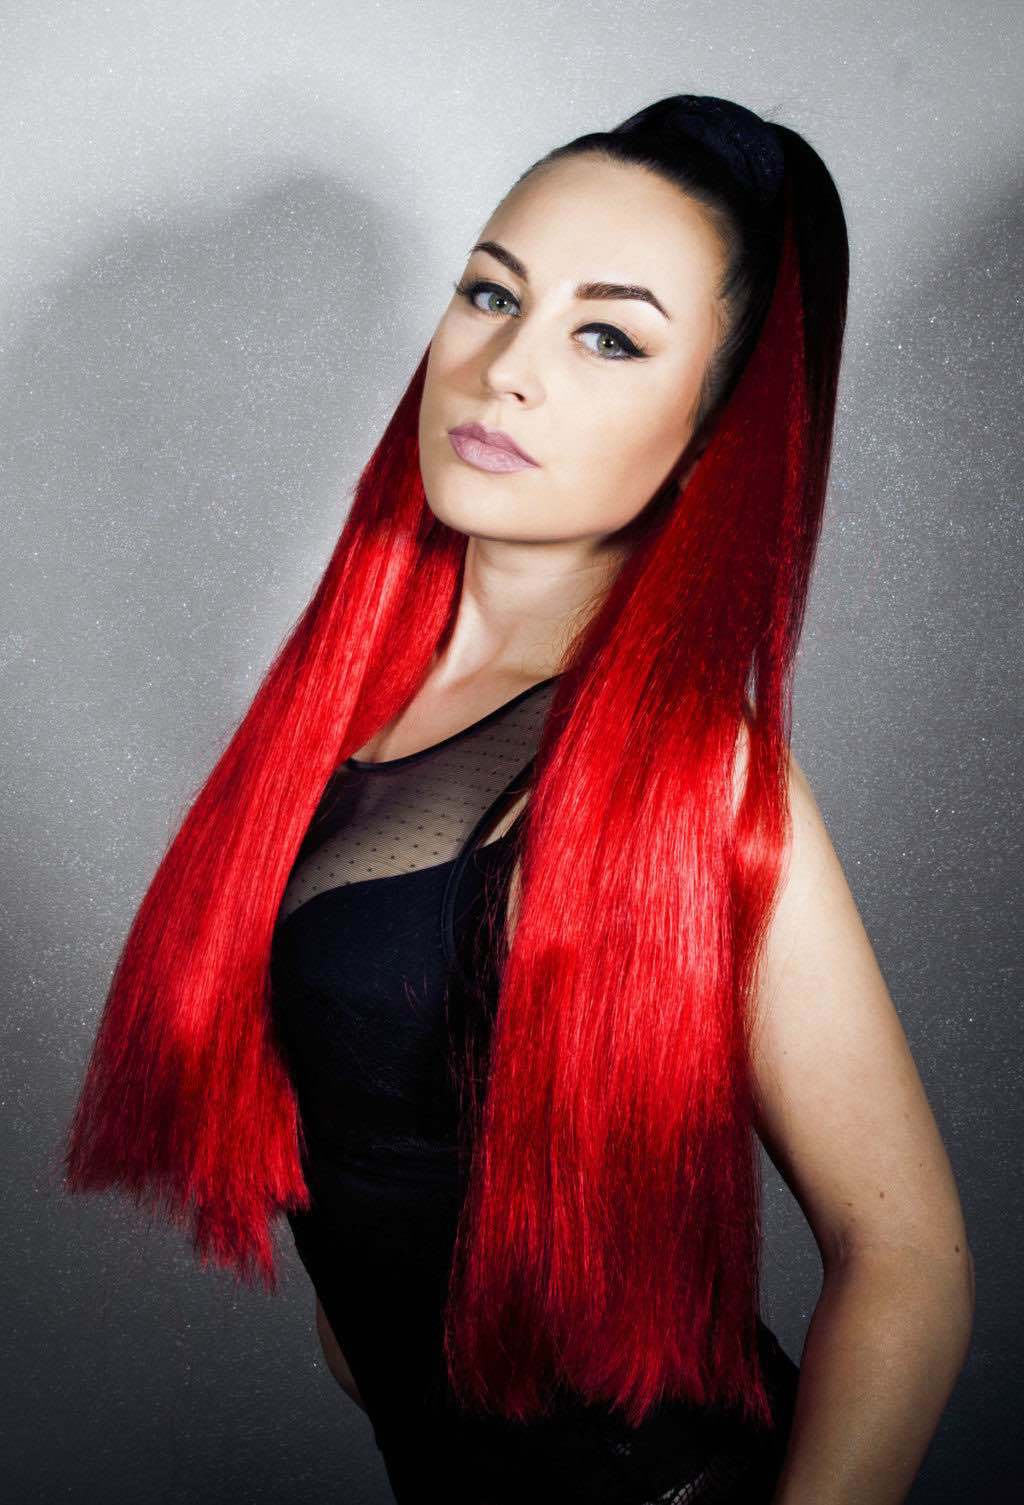 Female DJ with red hair